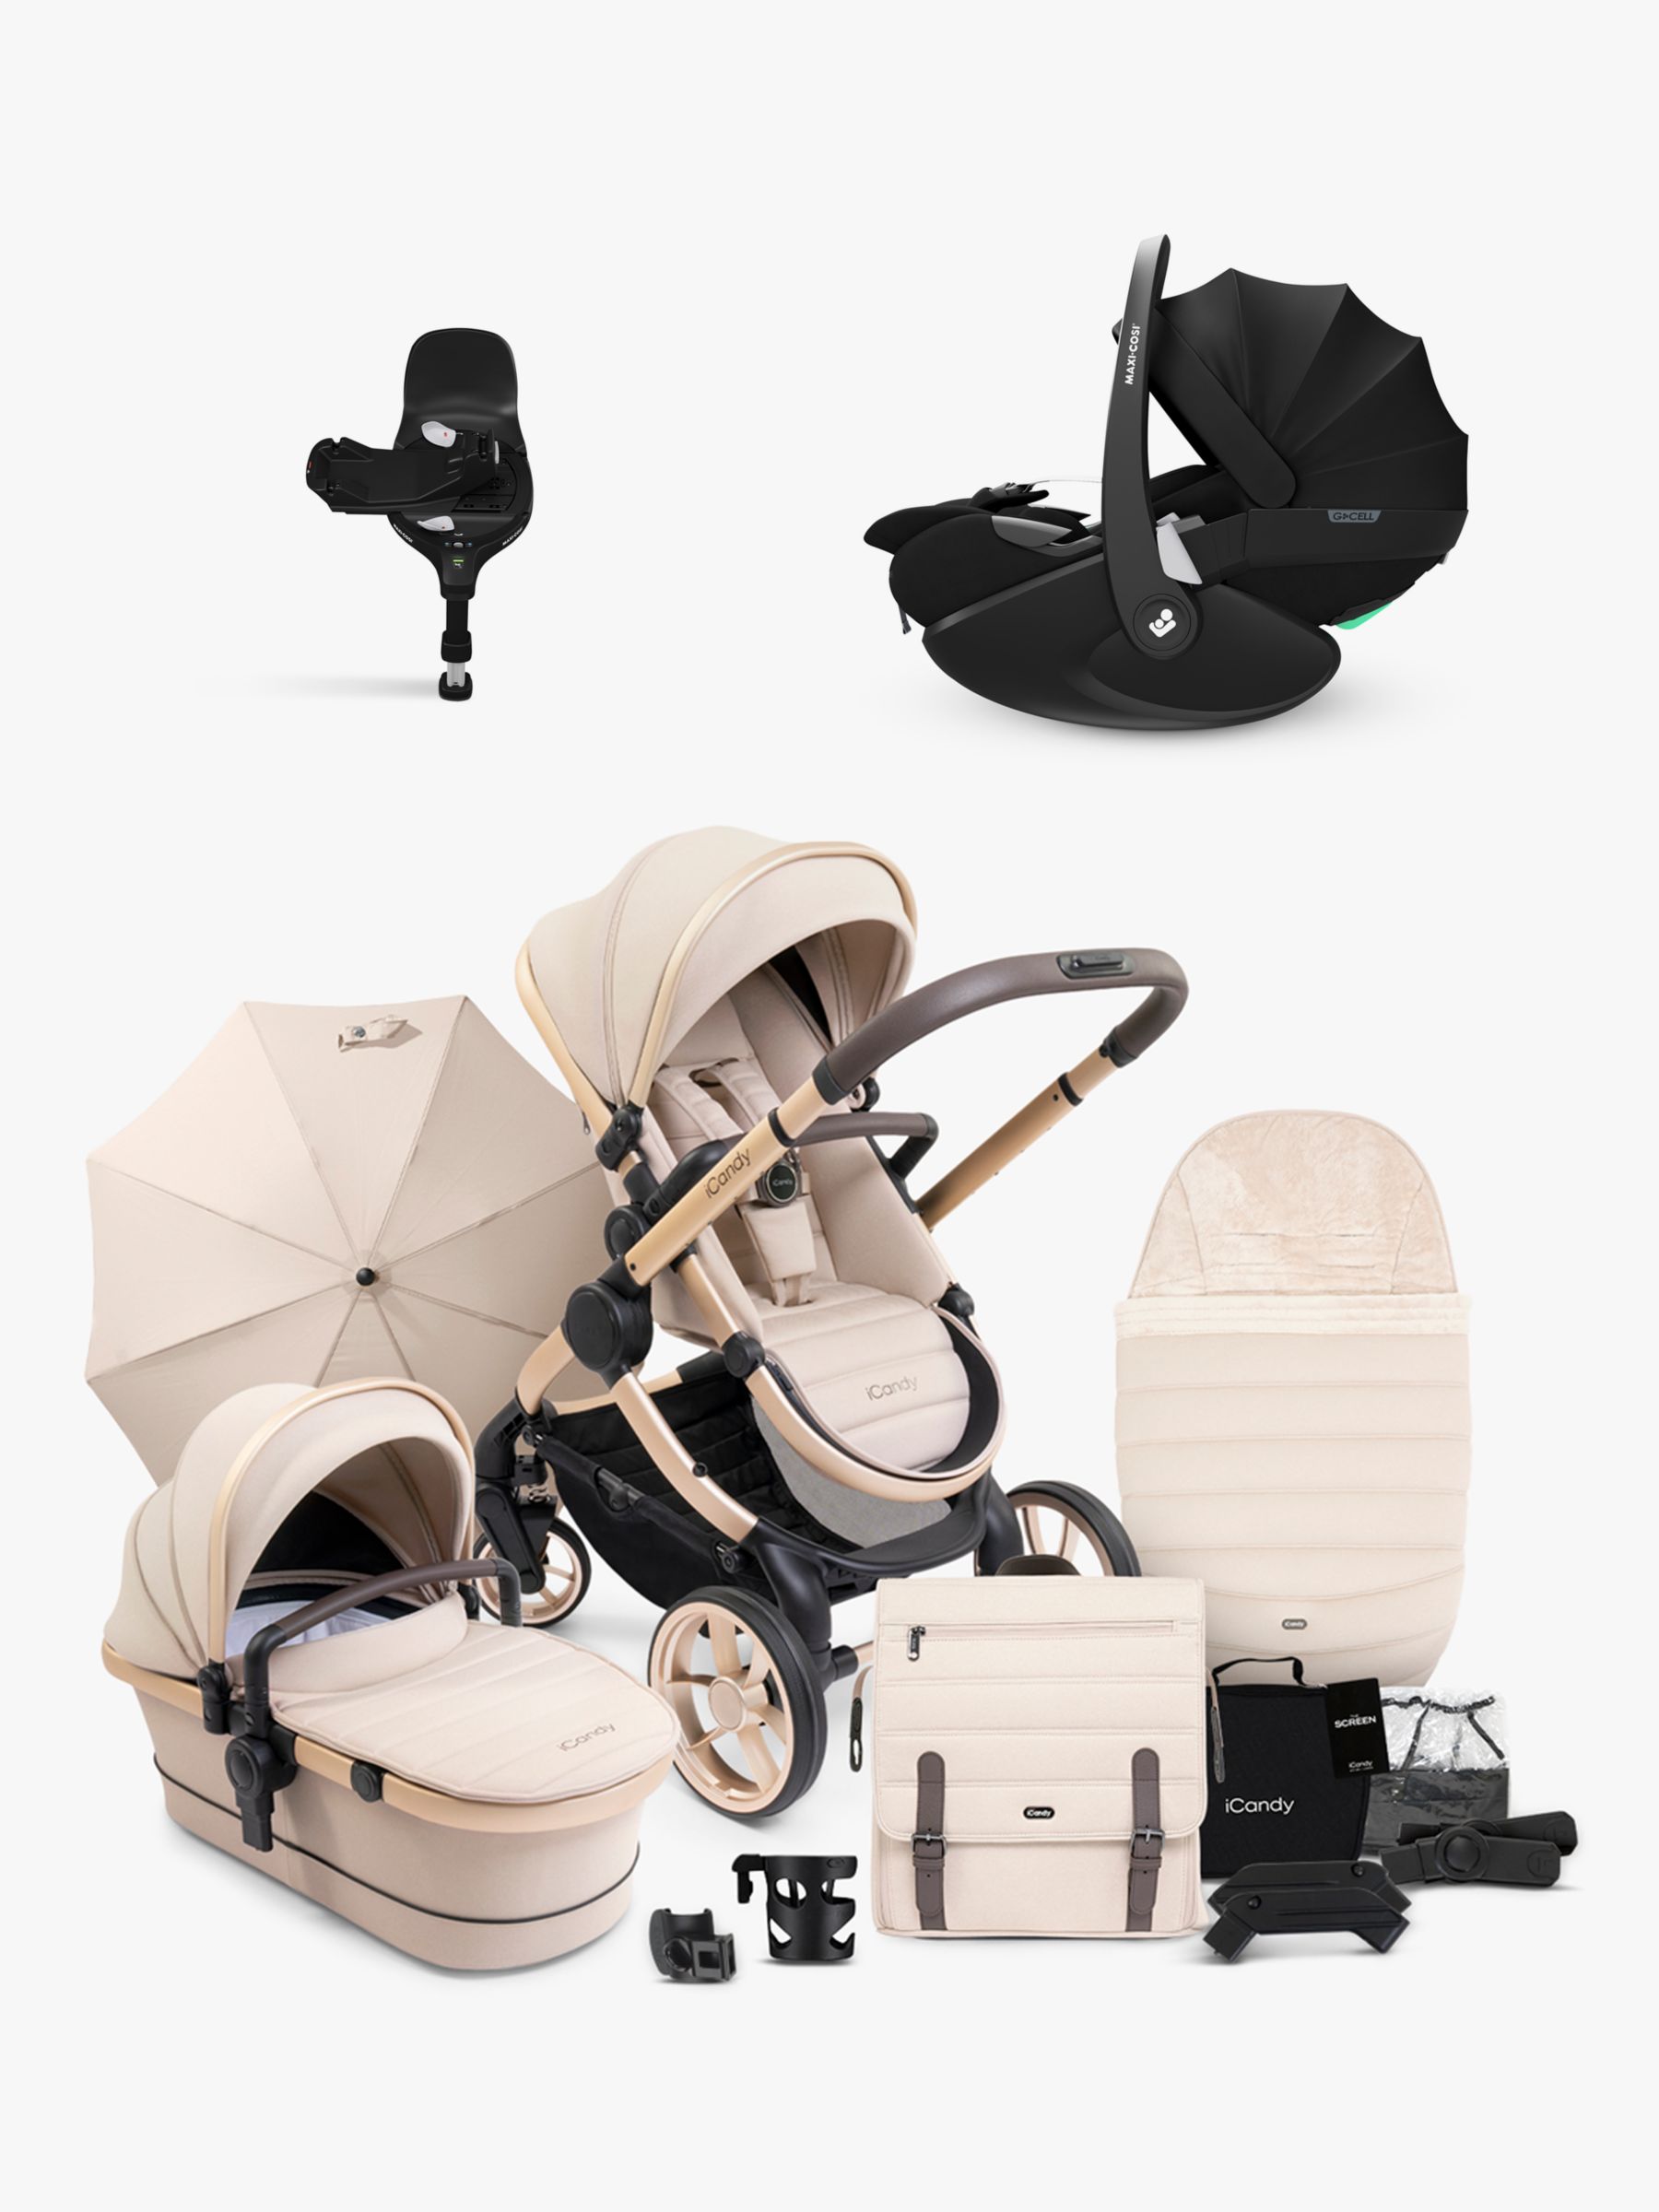 iCandy Peach 7 Pushchair & Accessories with Maxi-Cosi Pebble 360 Pro Baby Car Seat and Base Bundle, Biscotti/Essential Black